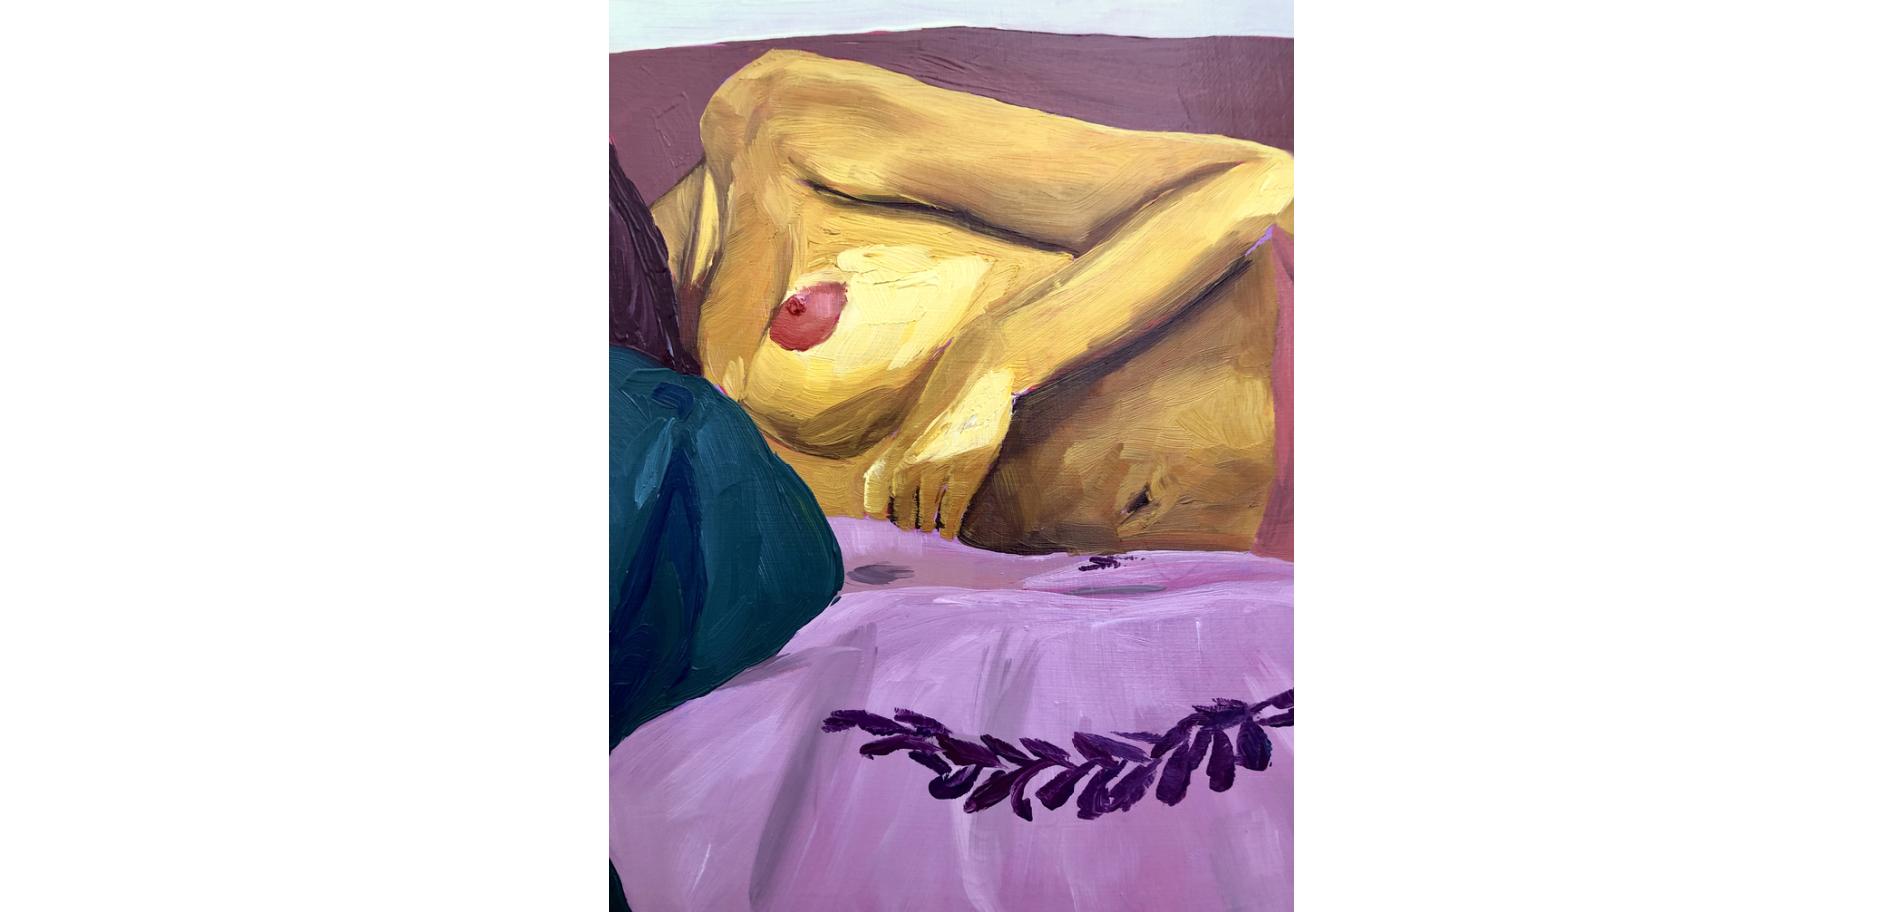 Study For Bedroom Scene 3, Oil painting on wood panel, figurative nude portrait - Brown Figurative Painting by Jessica Rubin